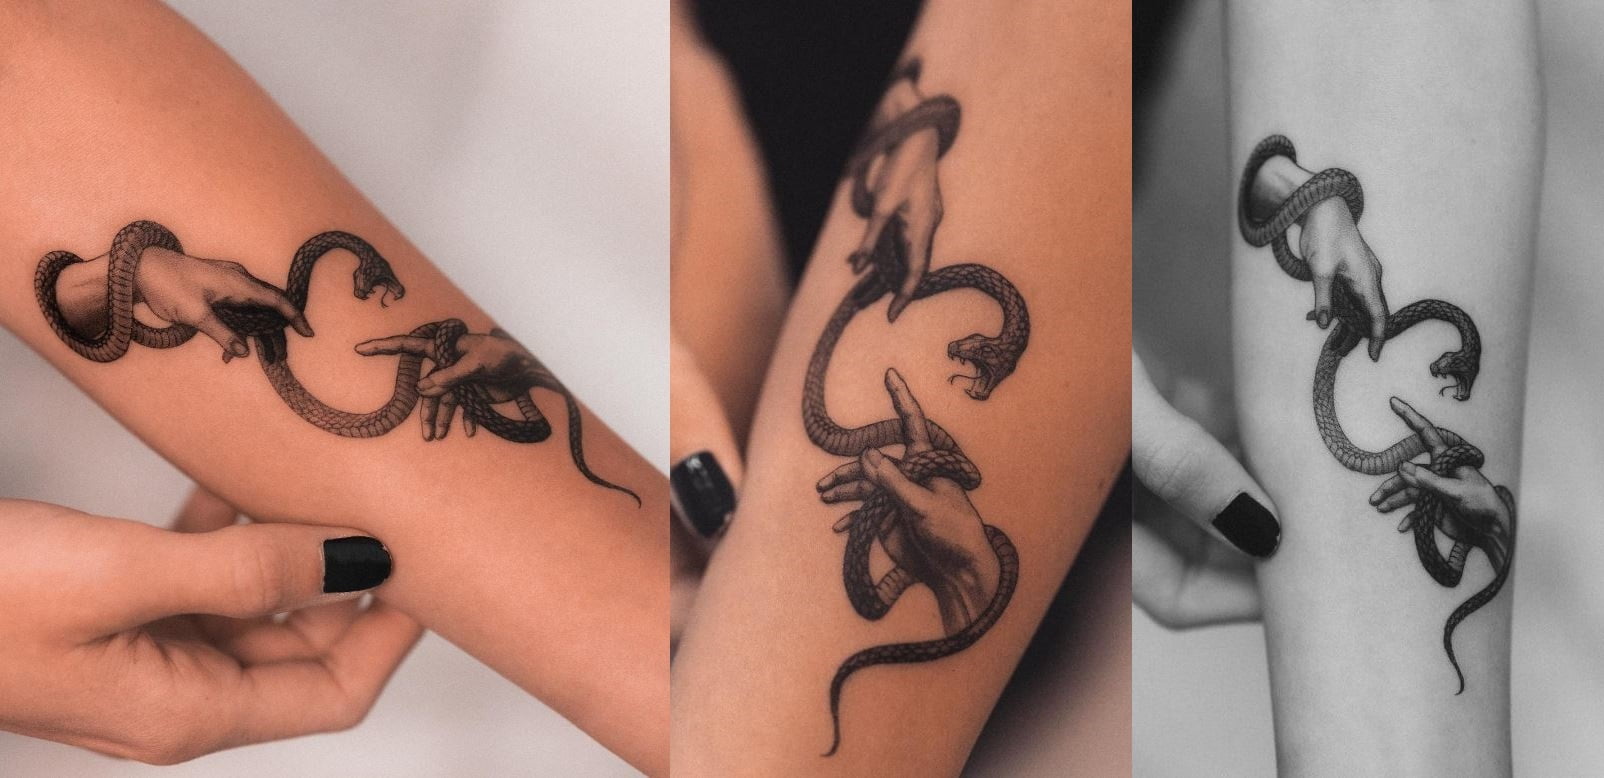 A tattoo of a snake and two hands 